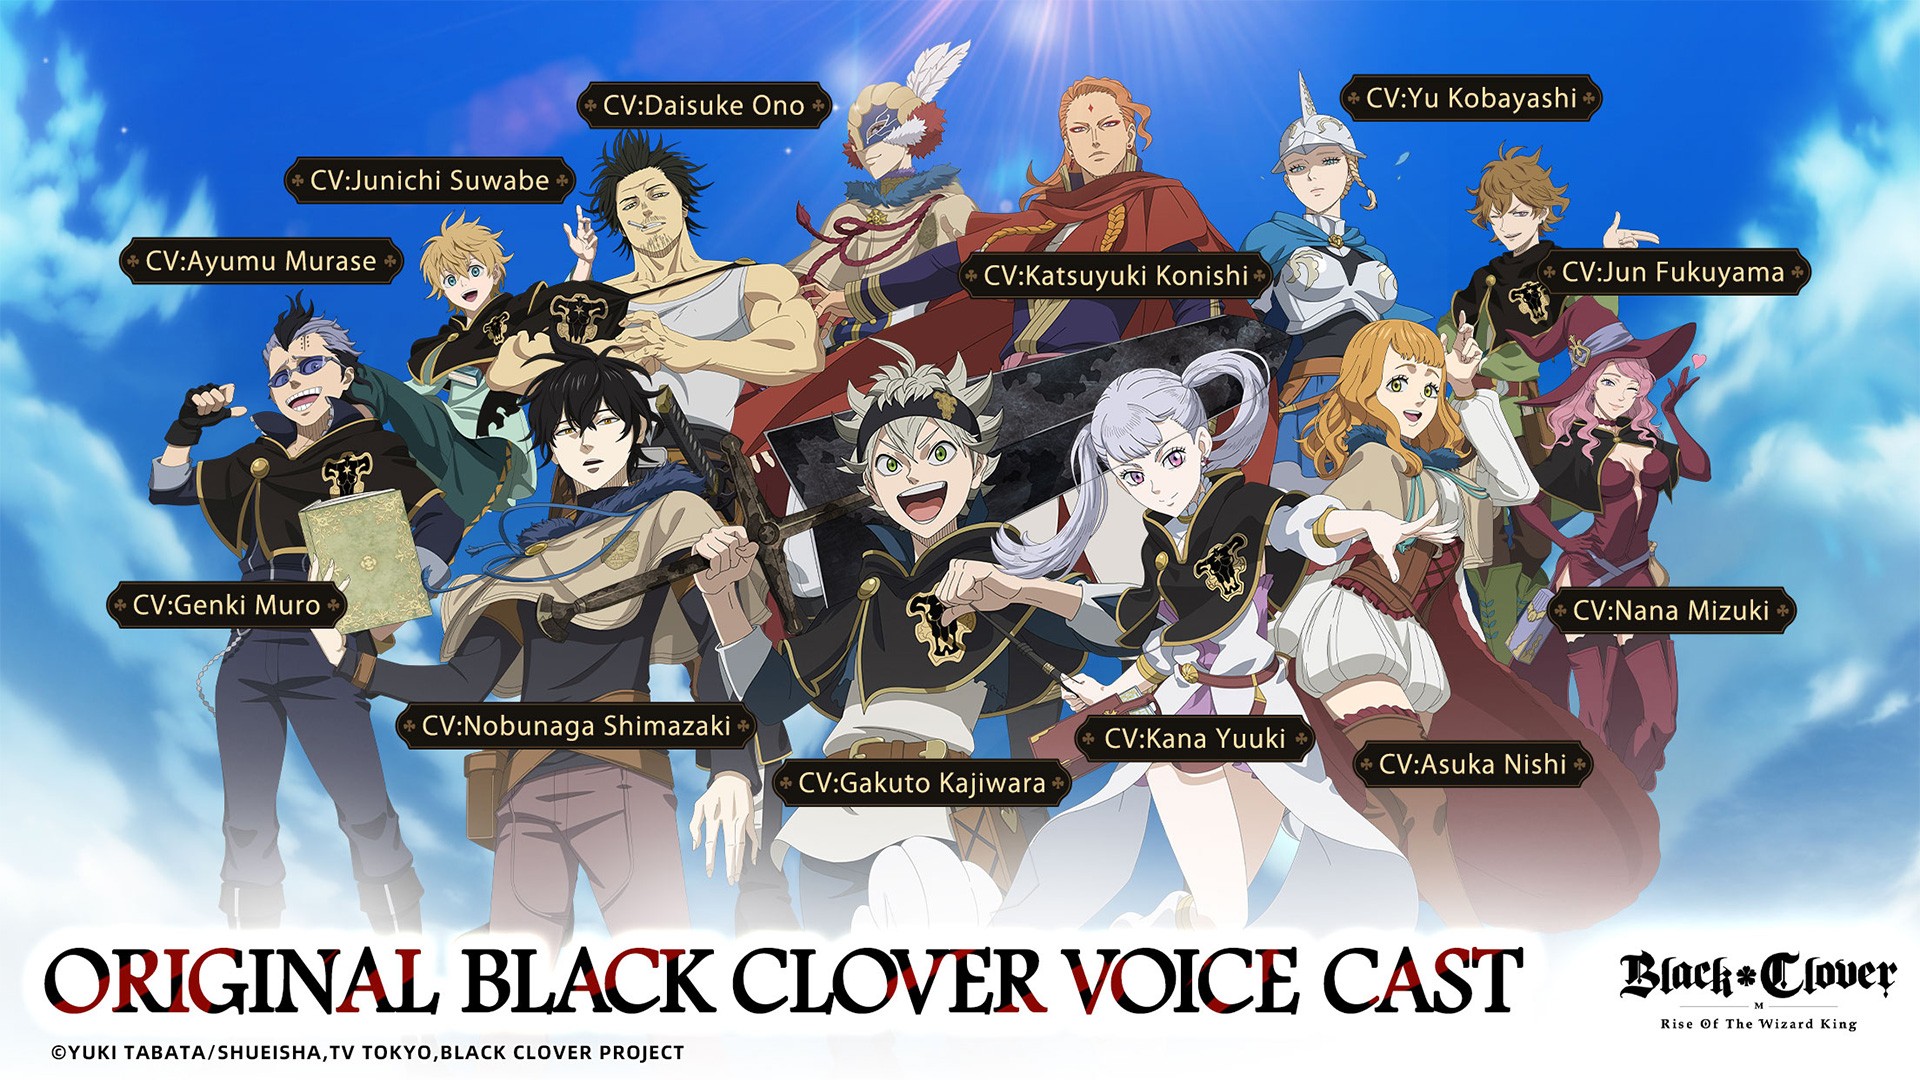 Pre-Registrations Open for Black Clover M: Rise of the Wizard King